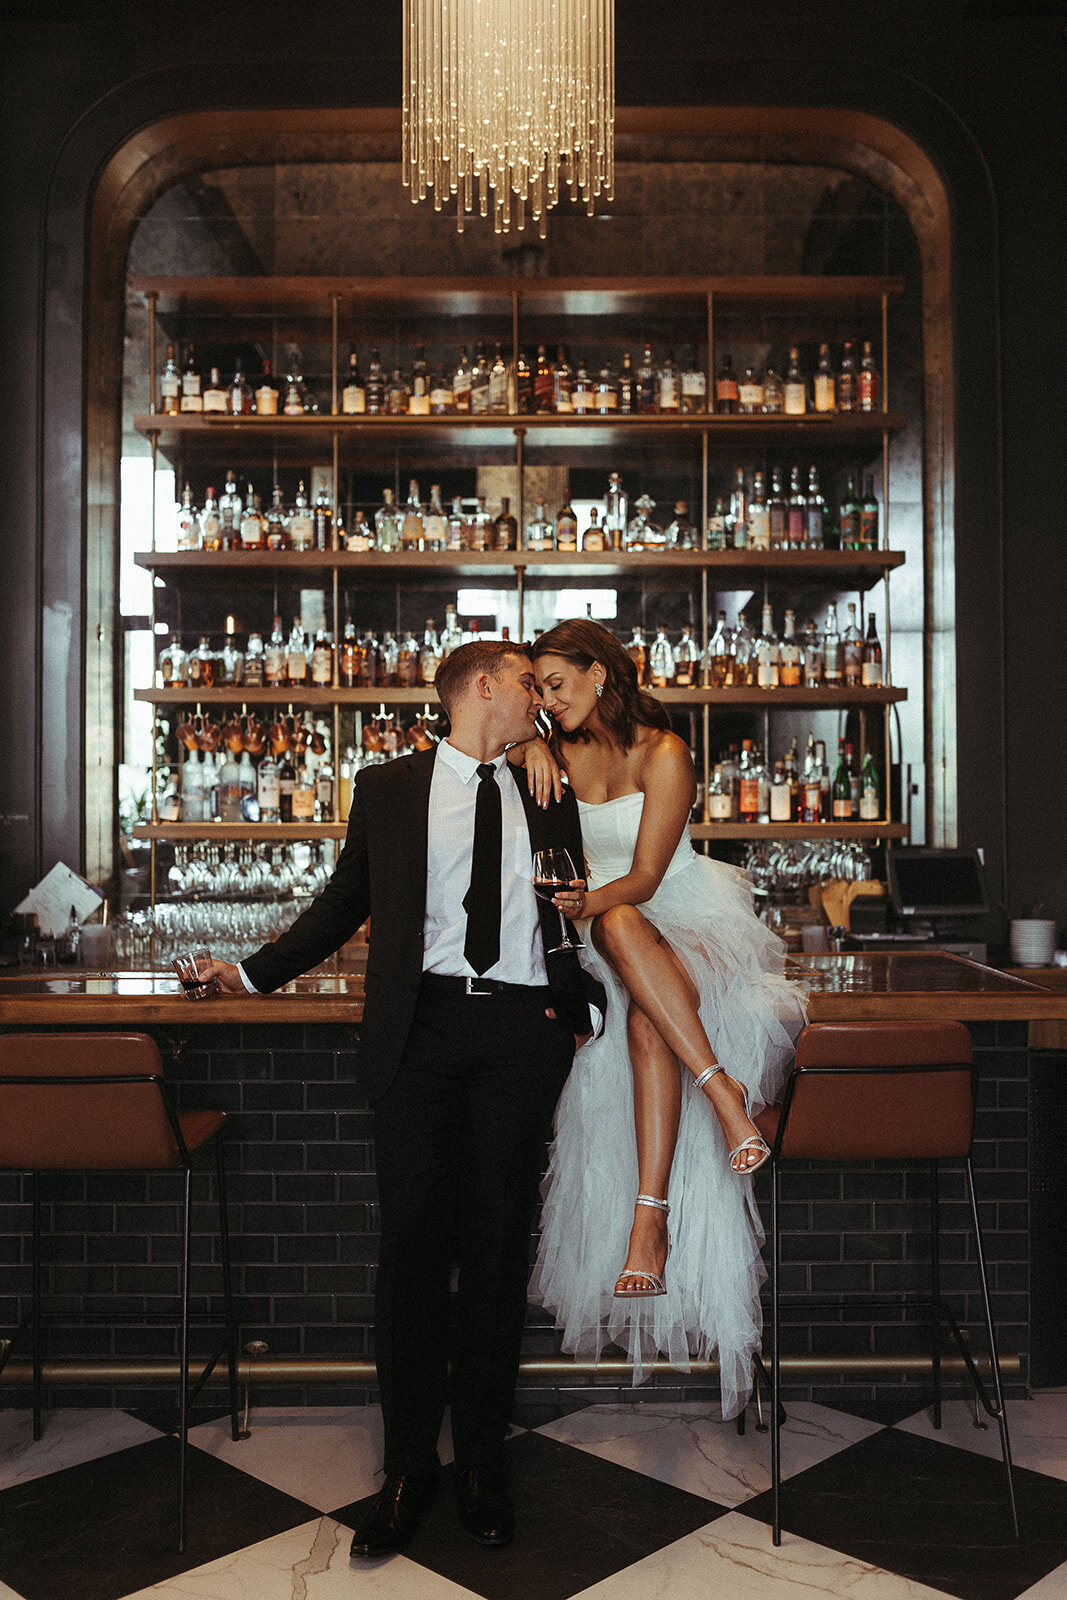 An intimate engagement session with A+J at the Hotel Deco in downtown Omaha